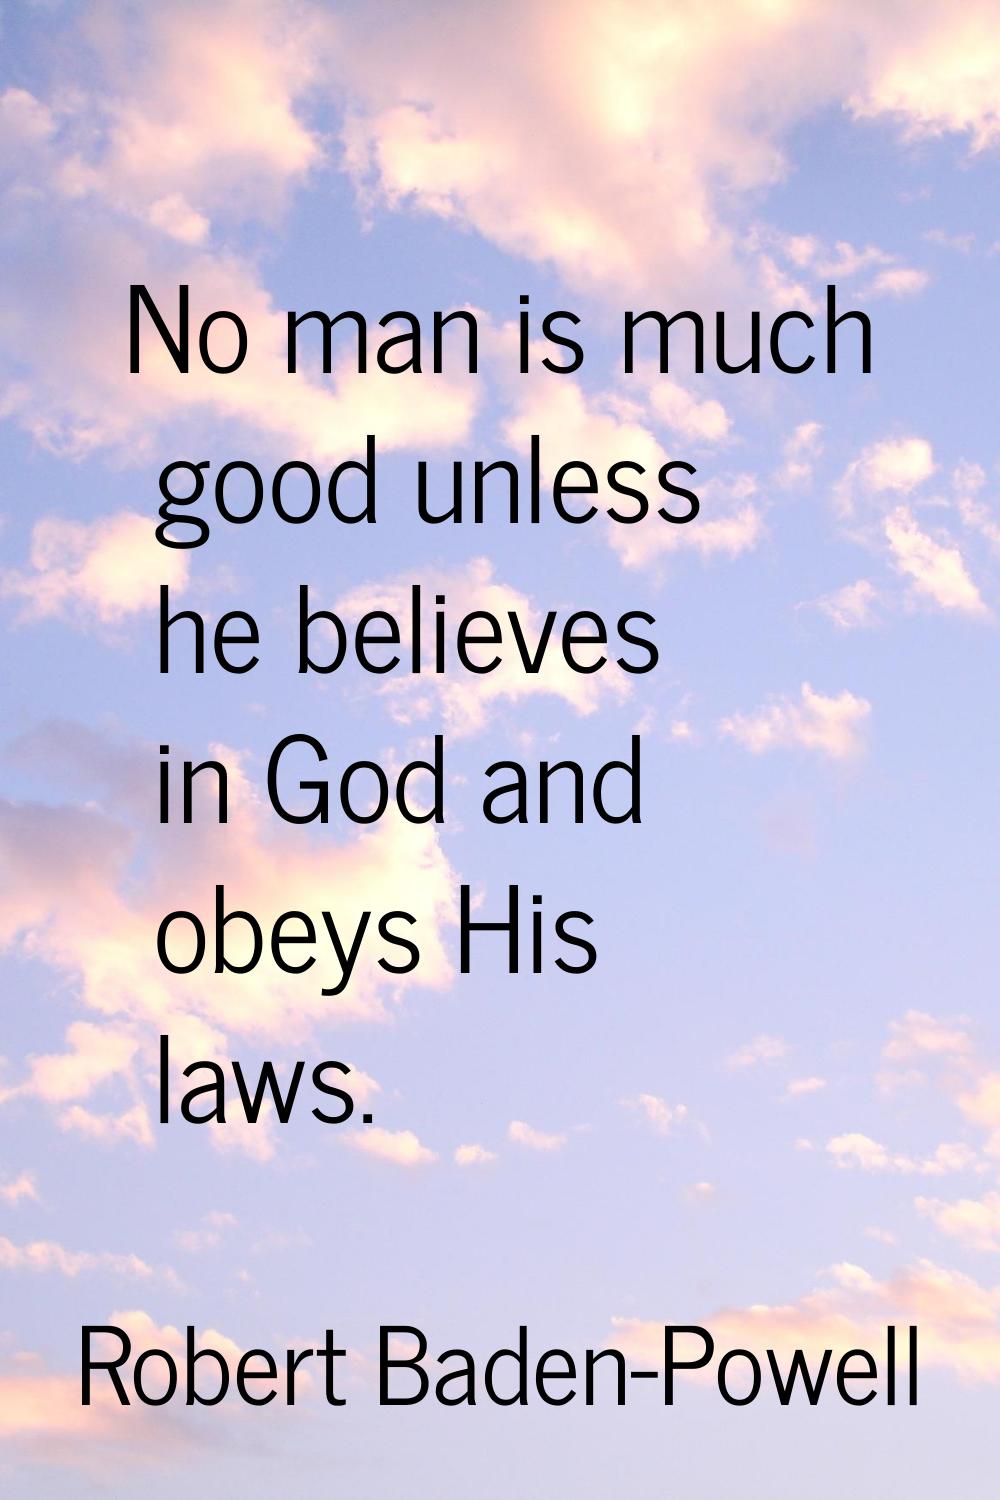 No man is much good unless he believes in God and obeys His laws.